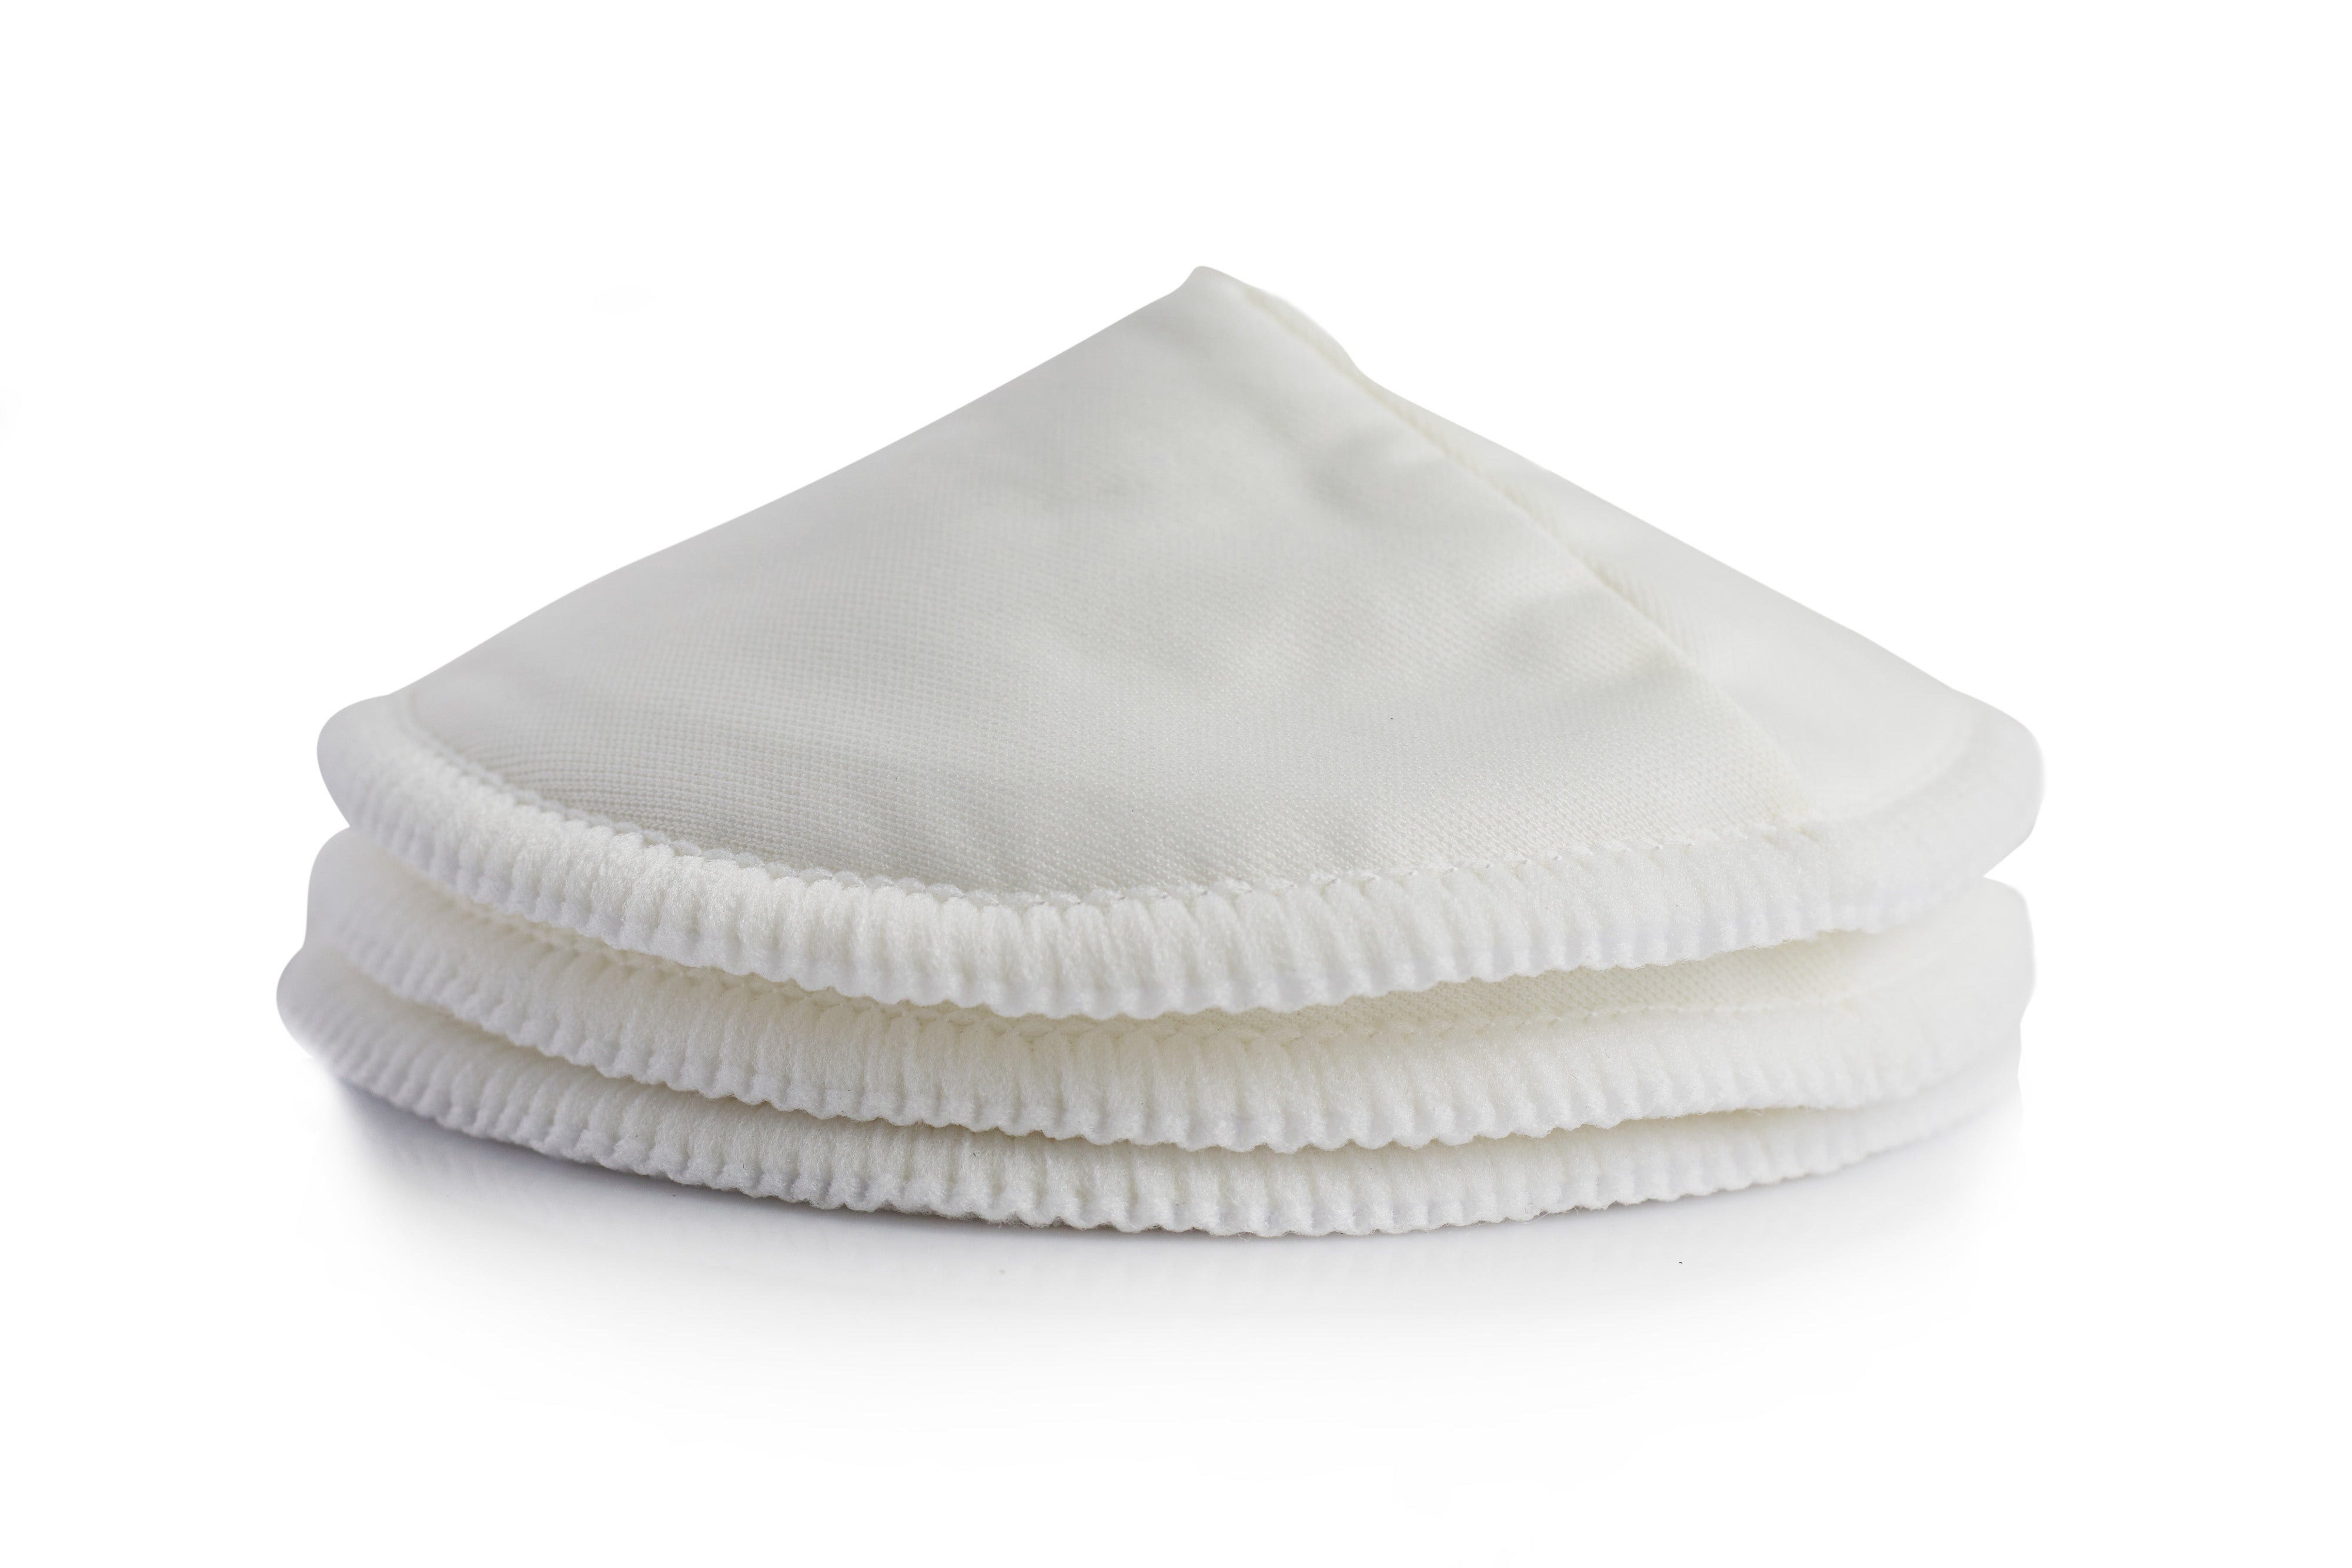 PureTree Organic Cotton Surface Disposable Nursing Pads for Breastfeed